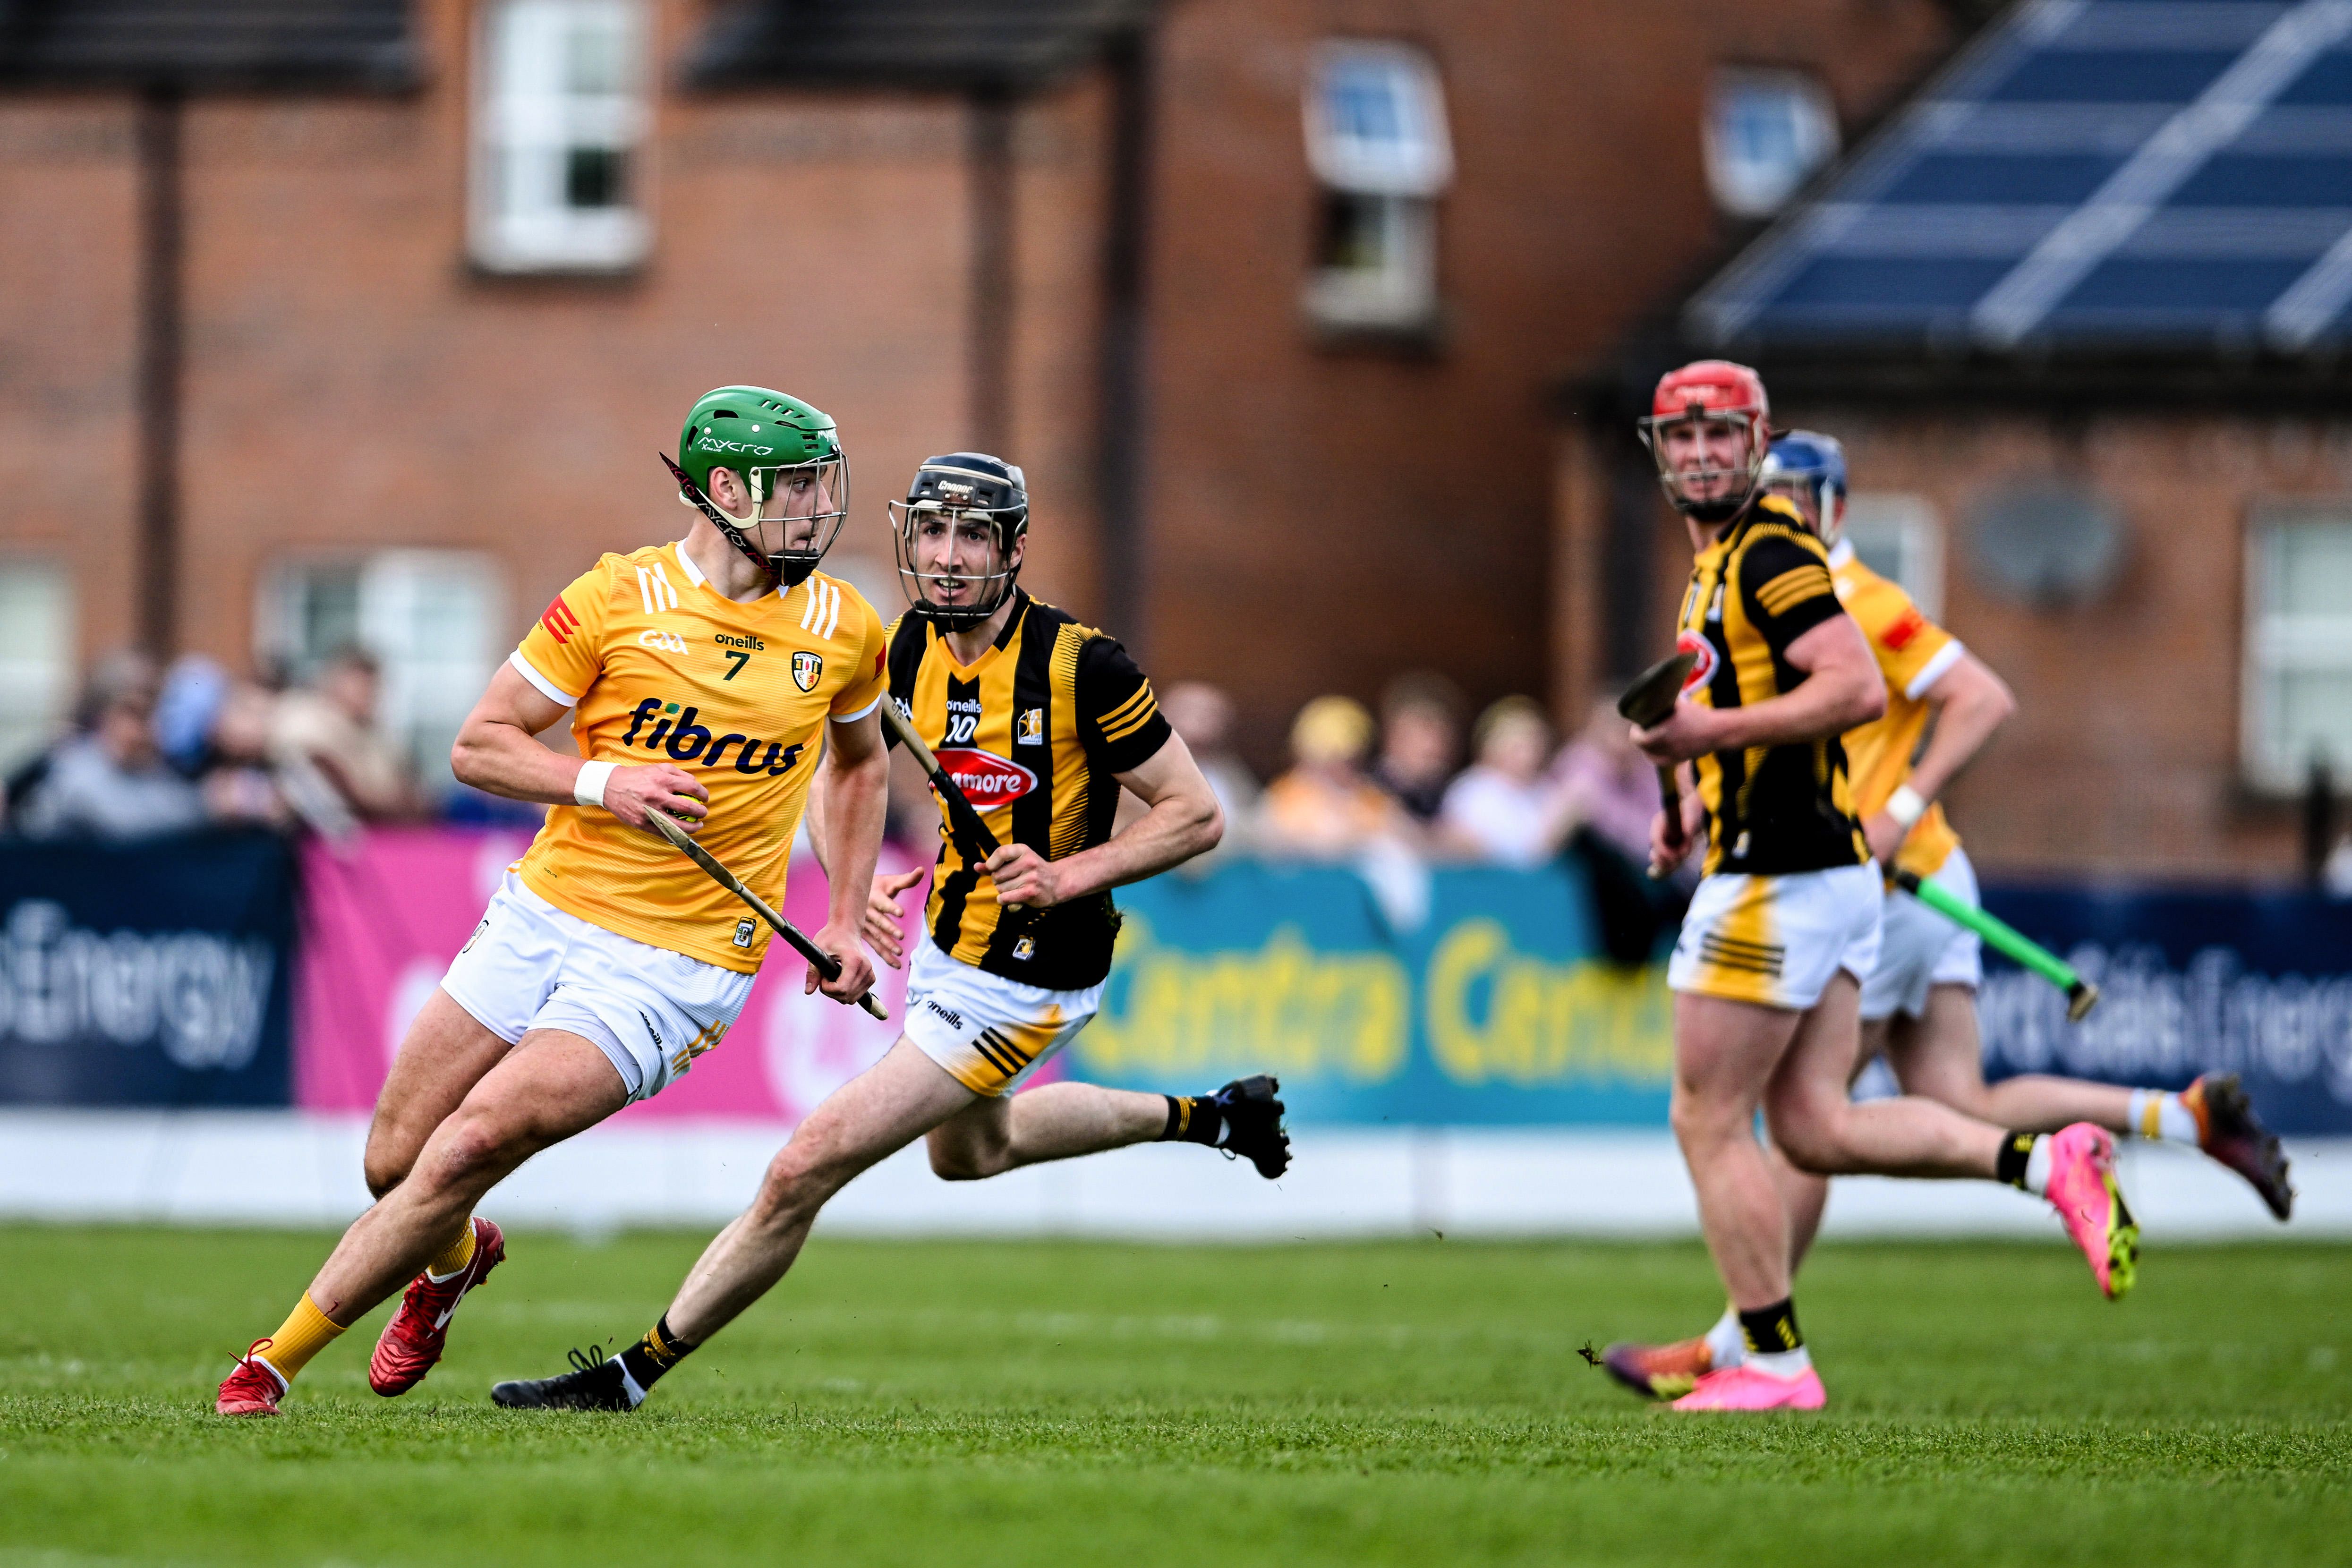 Conall Bohill in action for Antrim against Kilkenny on Sunday 